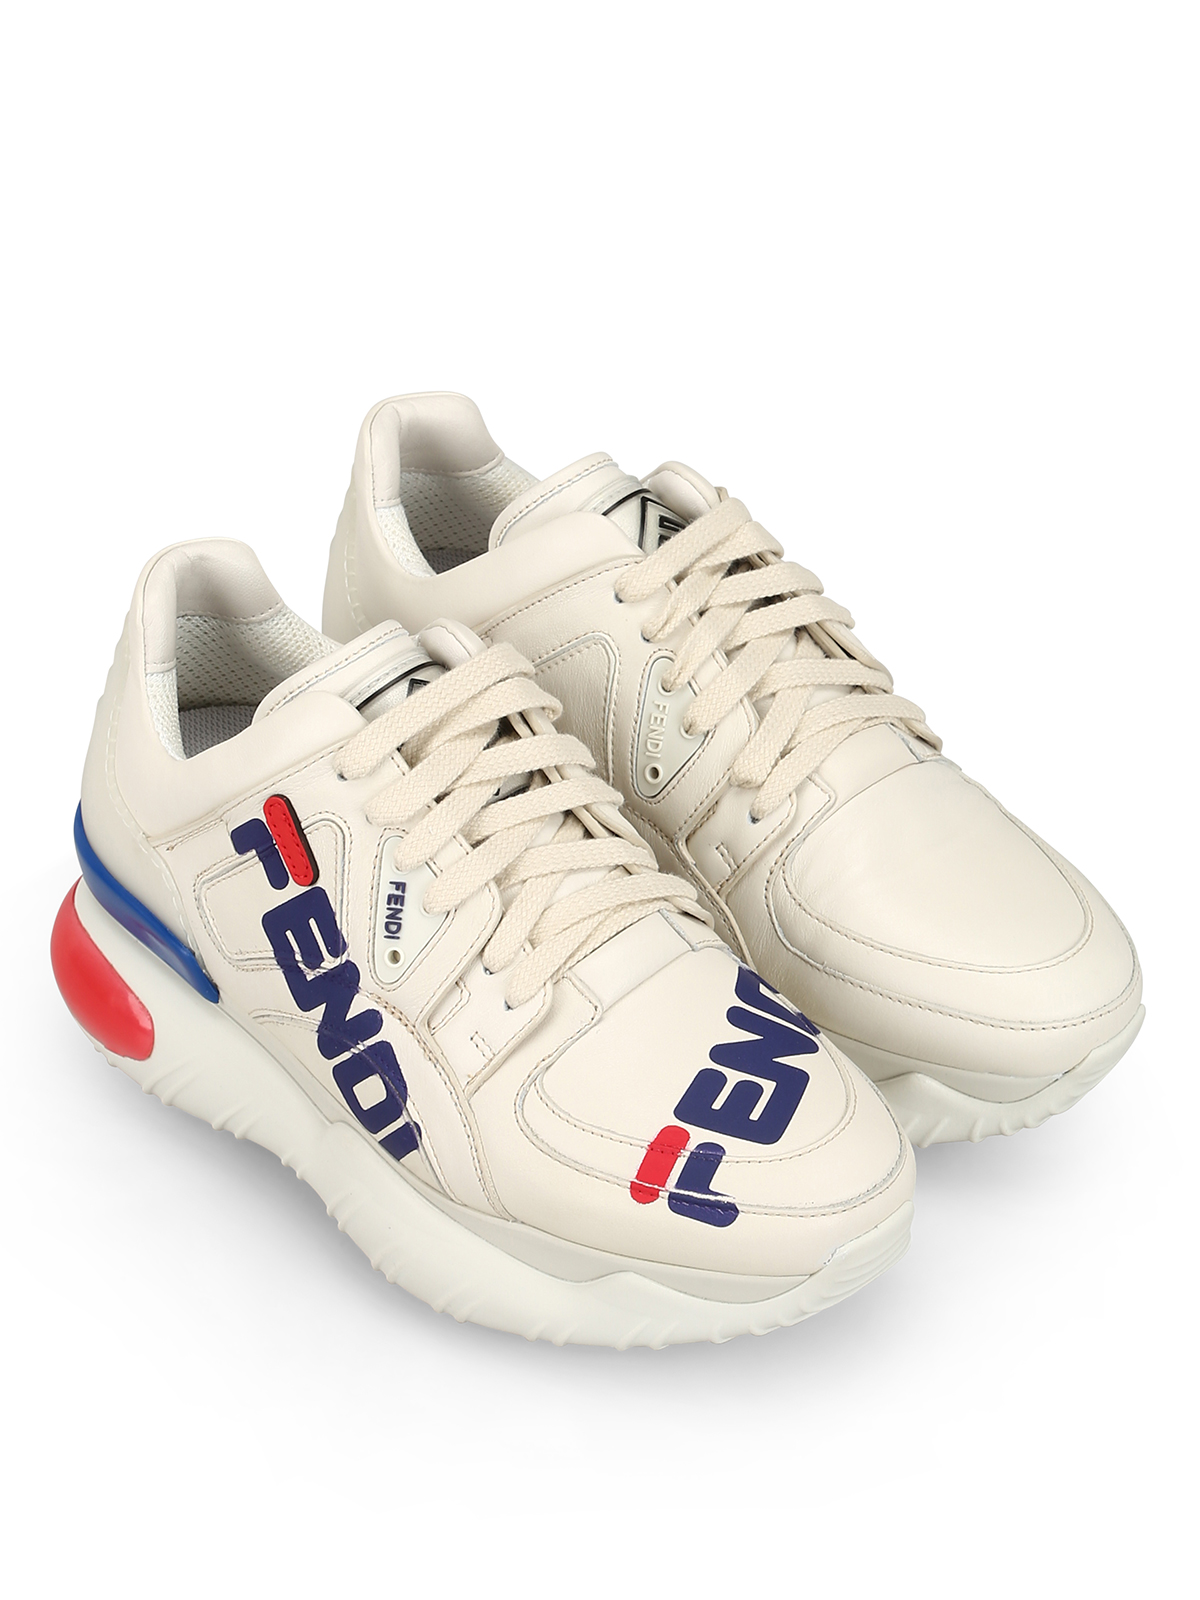 Fendi Mania leather lace up sneakers 